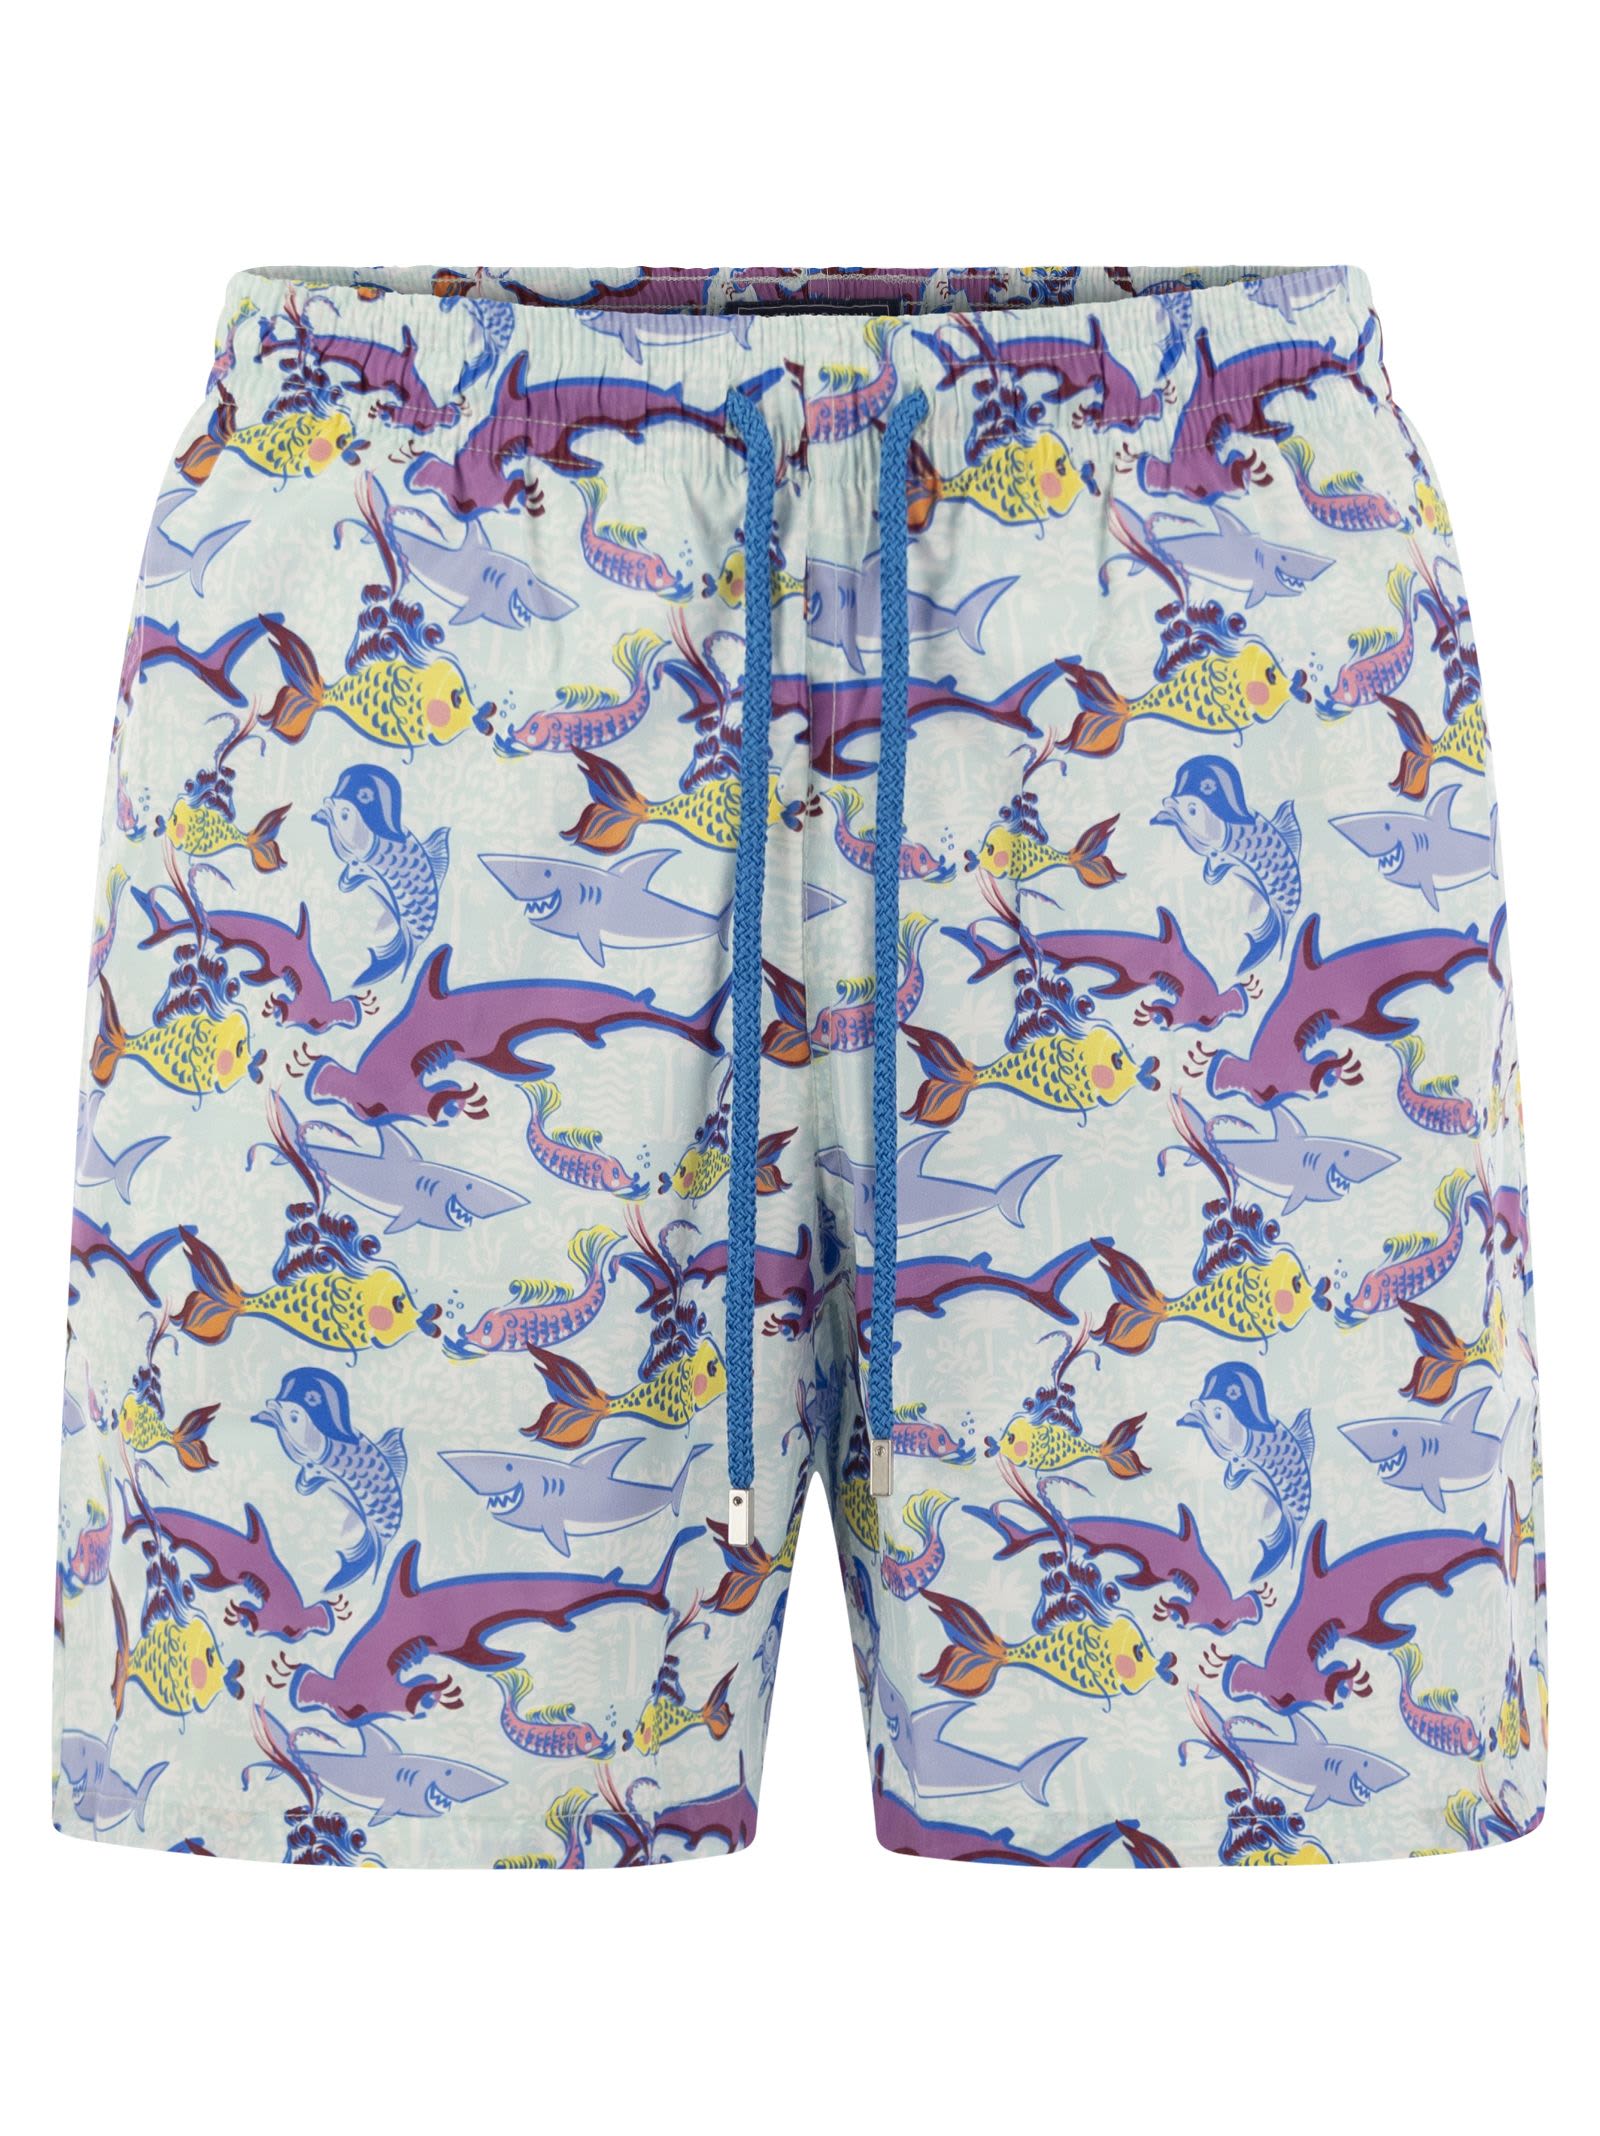 Ultralight, Foldable Beach Shorts With Print